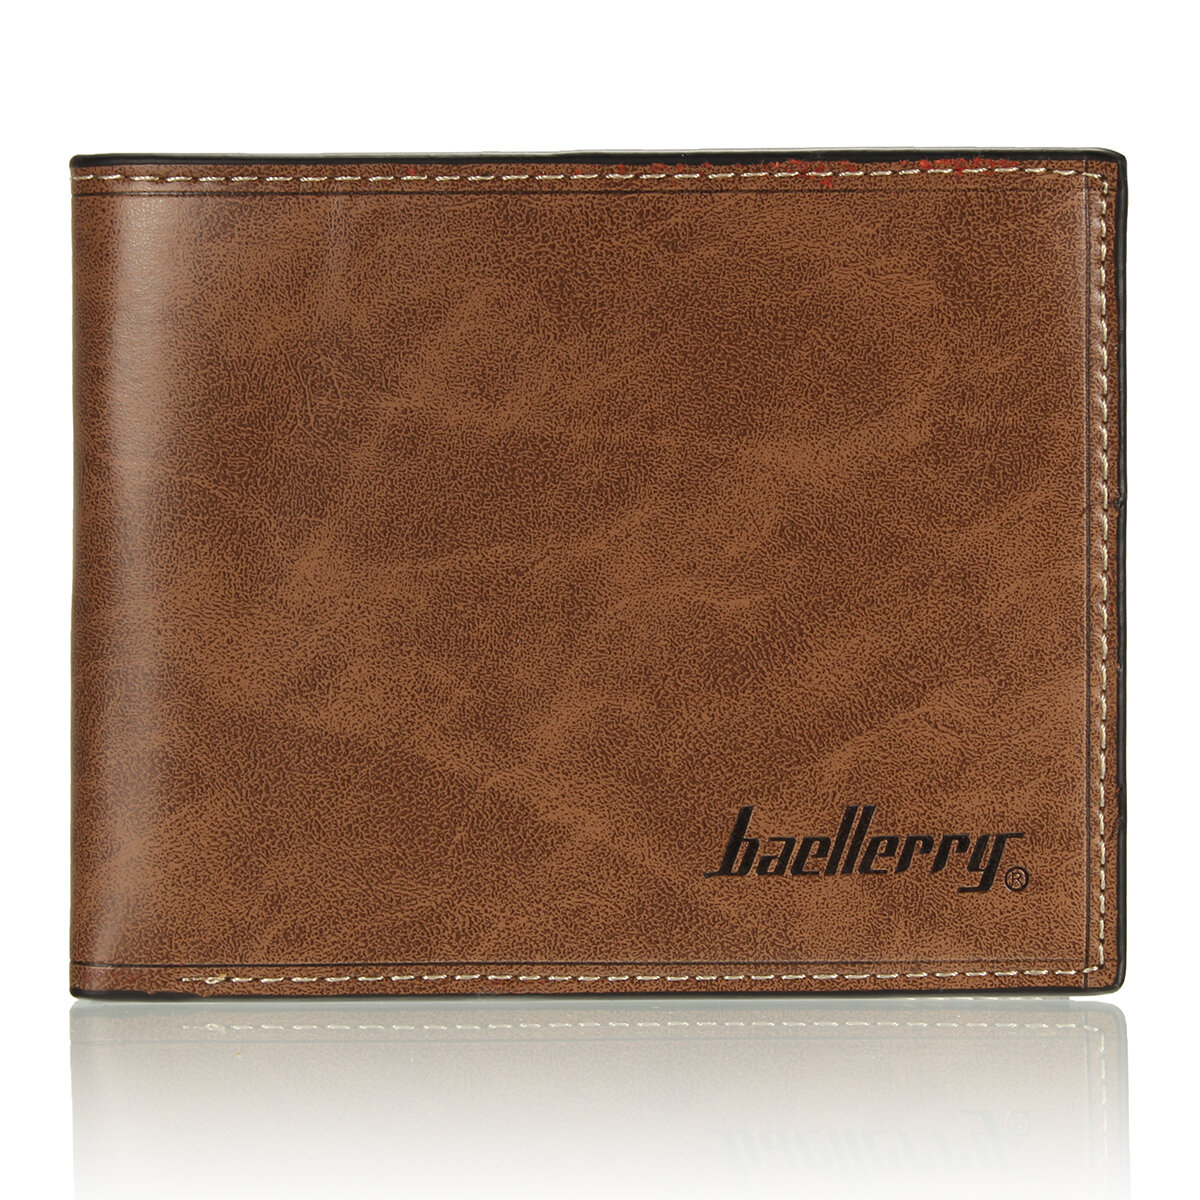 Baellerry Vintage Men's Faux Leather Thin Wallet Credit ID Card Holder Slim Coin Purse Pocket